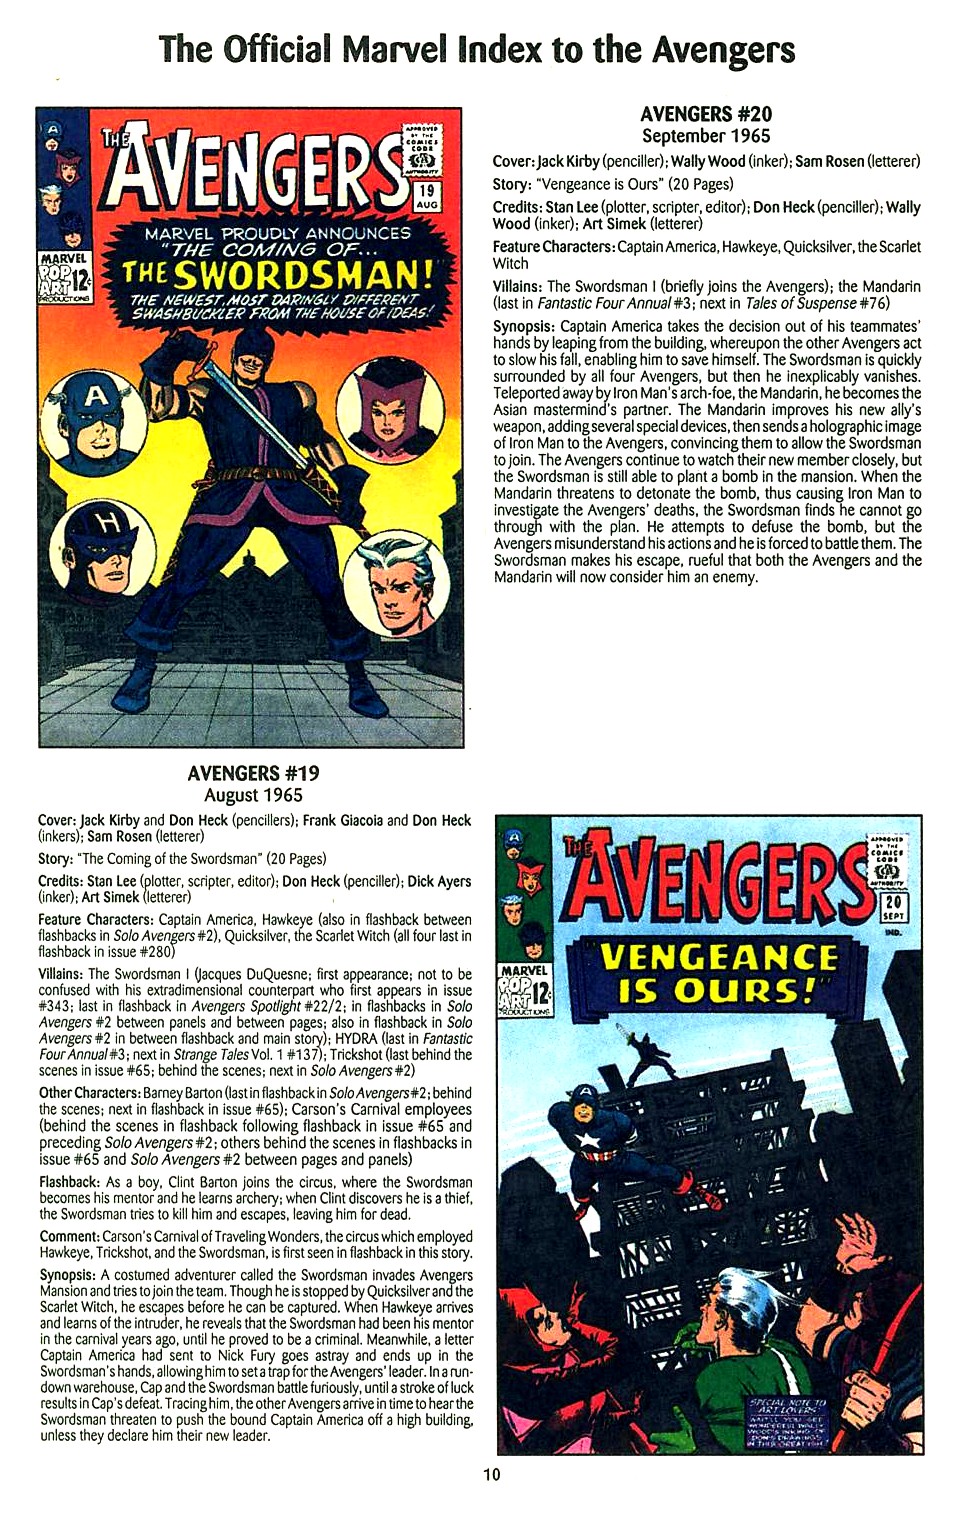 Read online The Official Marvel Index to the Avengers comic -  Issue #1 - 12